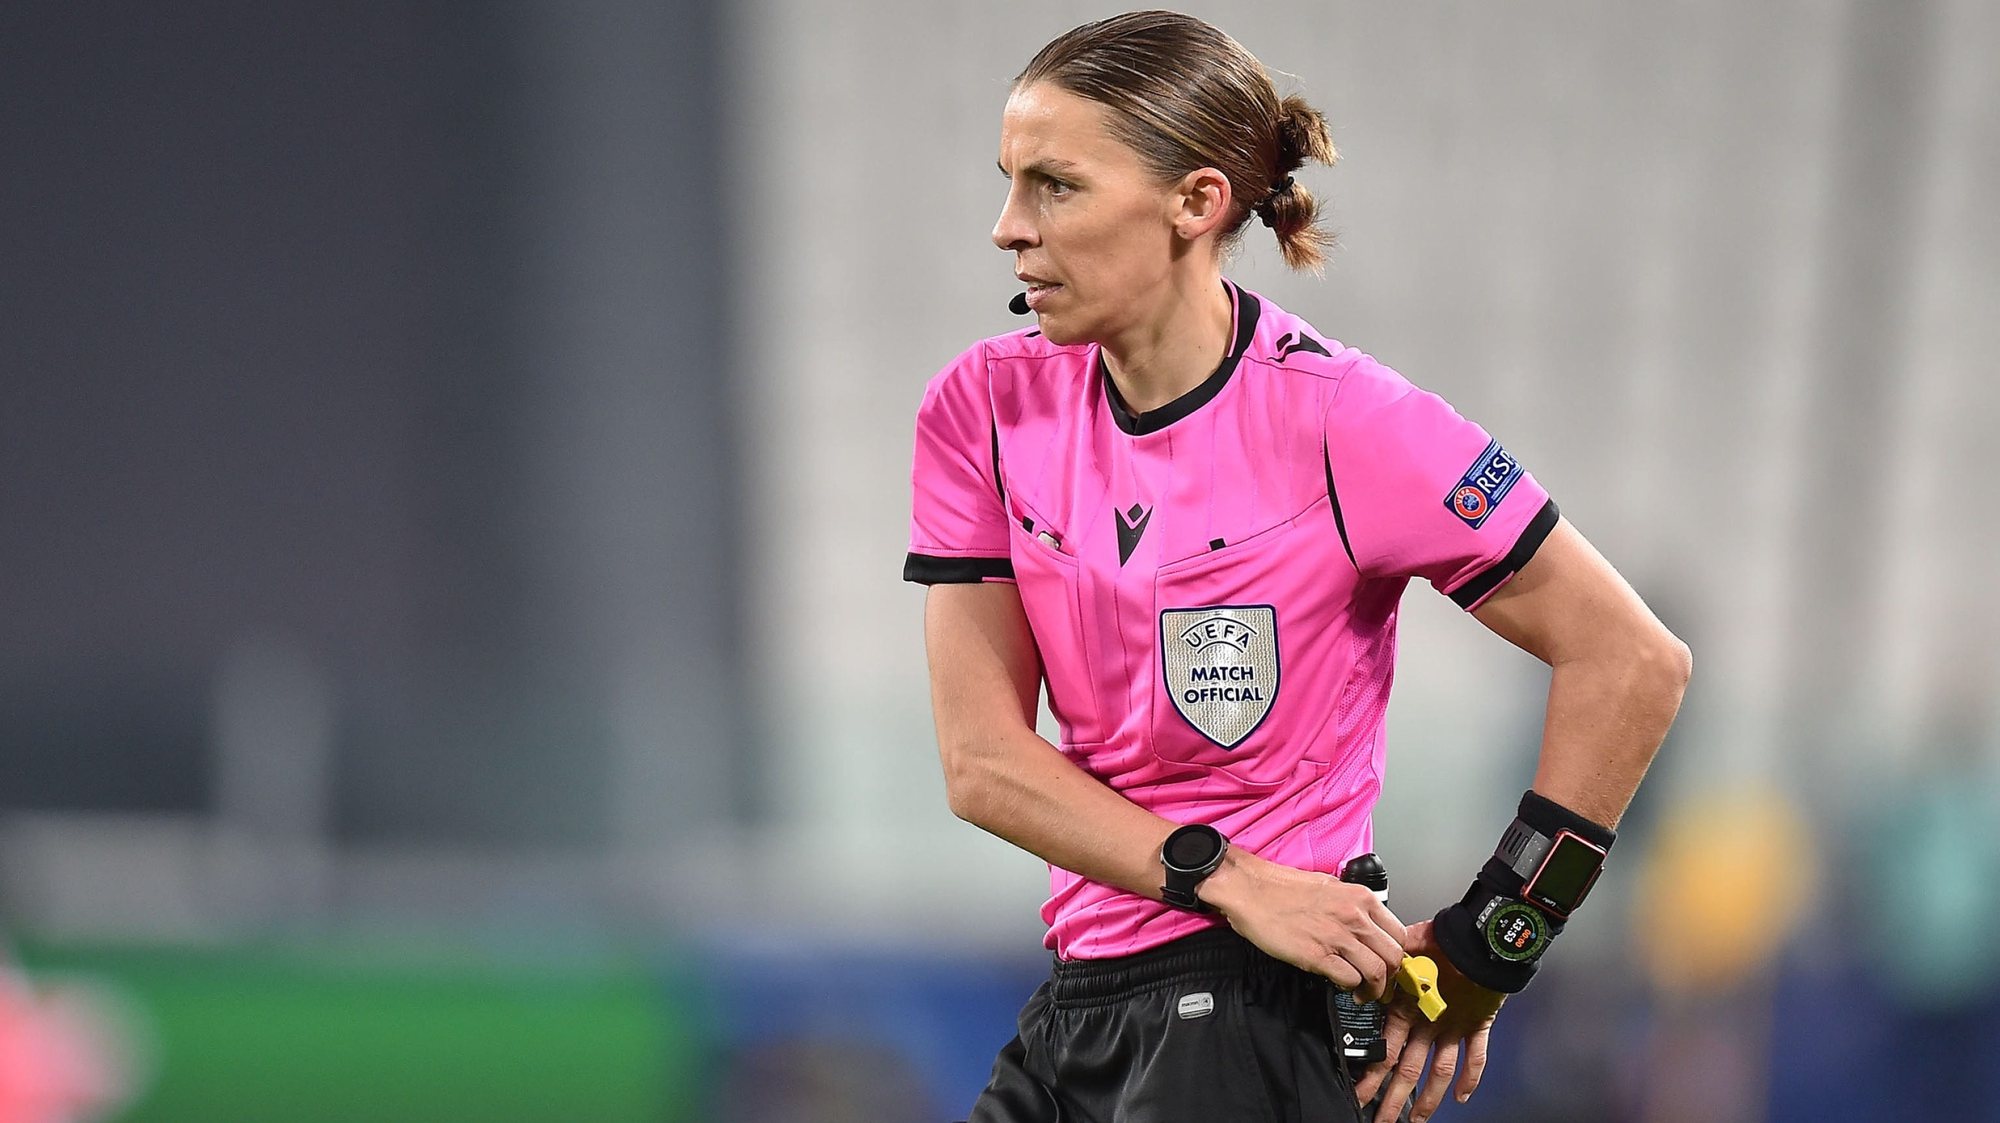 epa08858207 French referee Stephanie Frappart (C) during the UEFA Champions League Group G soccer match between Juventus FC vs FK Dynamo Kyiv at the Allianz Stadium in Turin, Italy, 2 December 2020. Frappart is the first female referee to lead a men&#039;s Champions League match.  EPA/ALESSANDRO DI MARCO